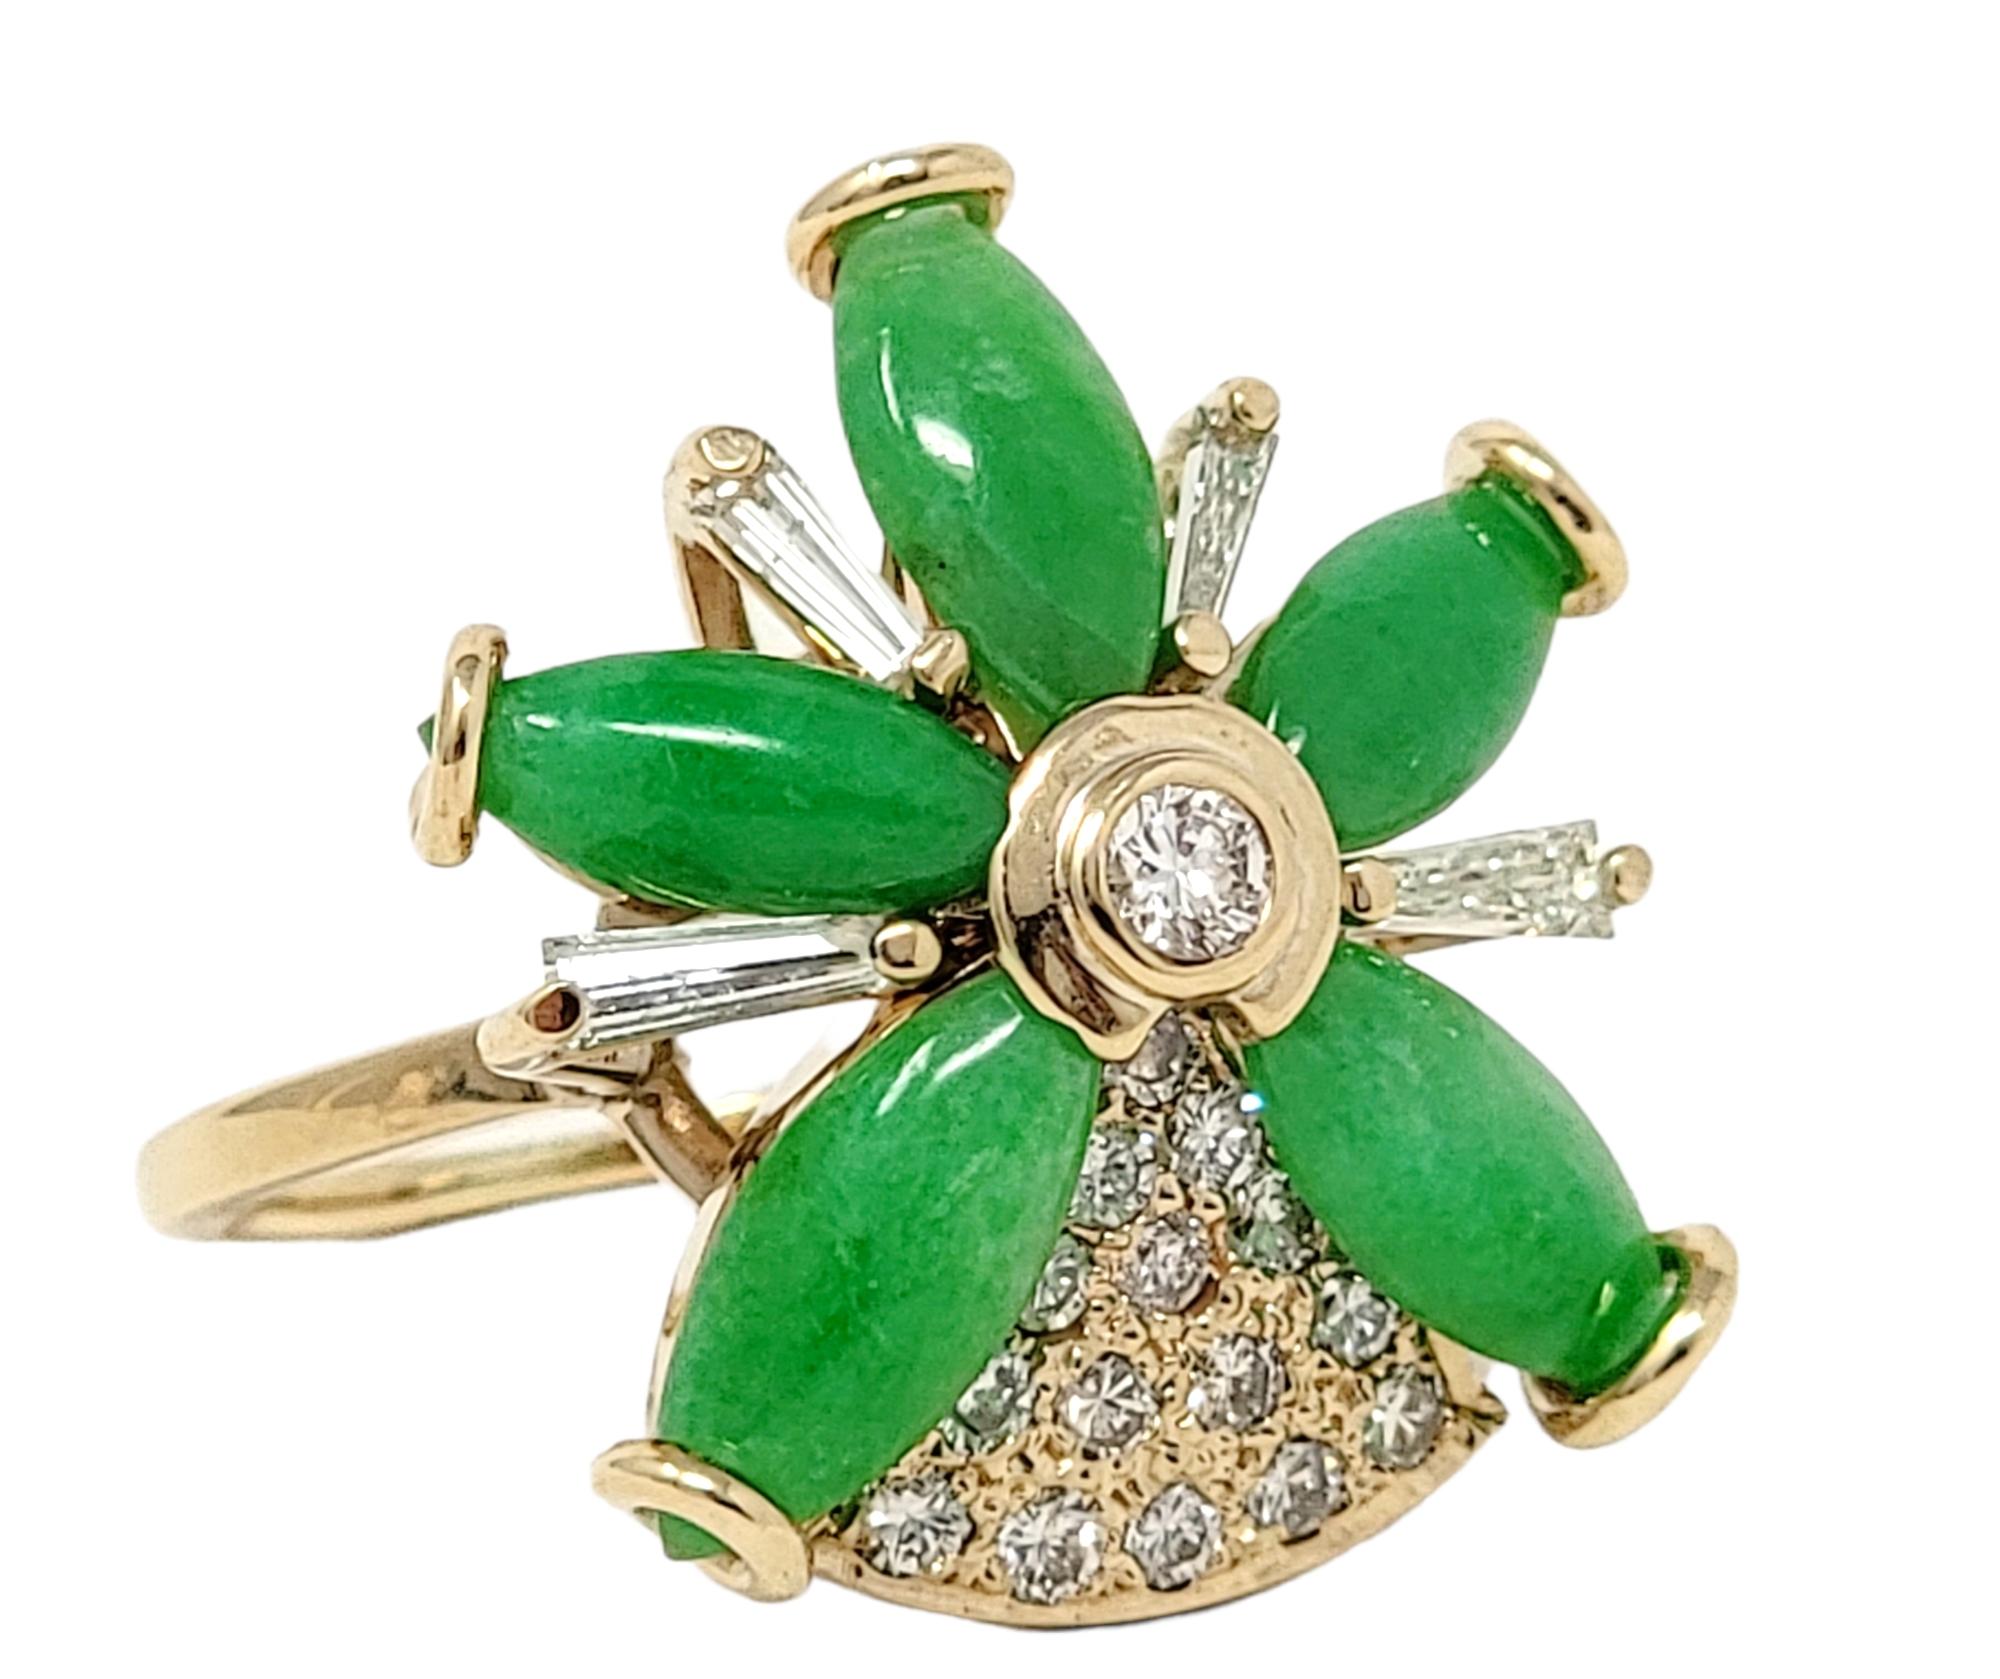 Ring size: 6.75

Unique jade and diamond flower ring will add both color and charm to your finger!  The sparkling cocktail style ring features a 5 cabochon jade petals with a single bezel set diamond at the center, as well as diamond accents around